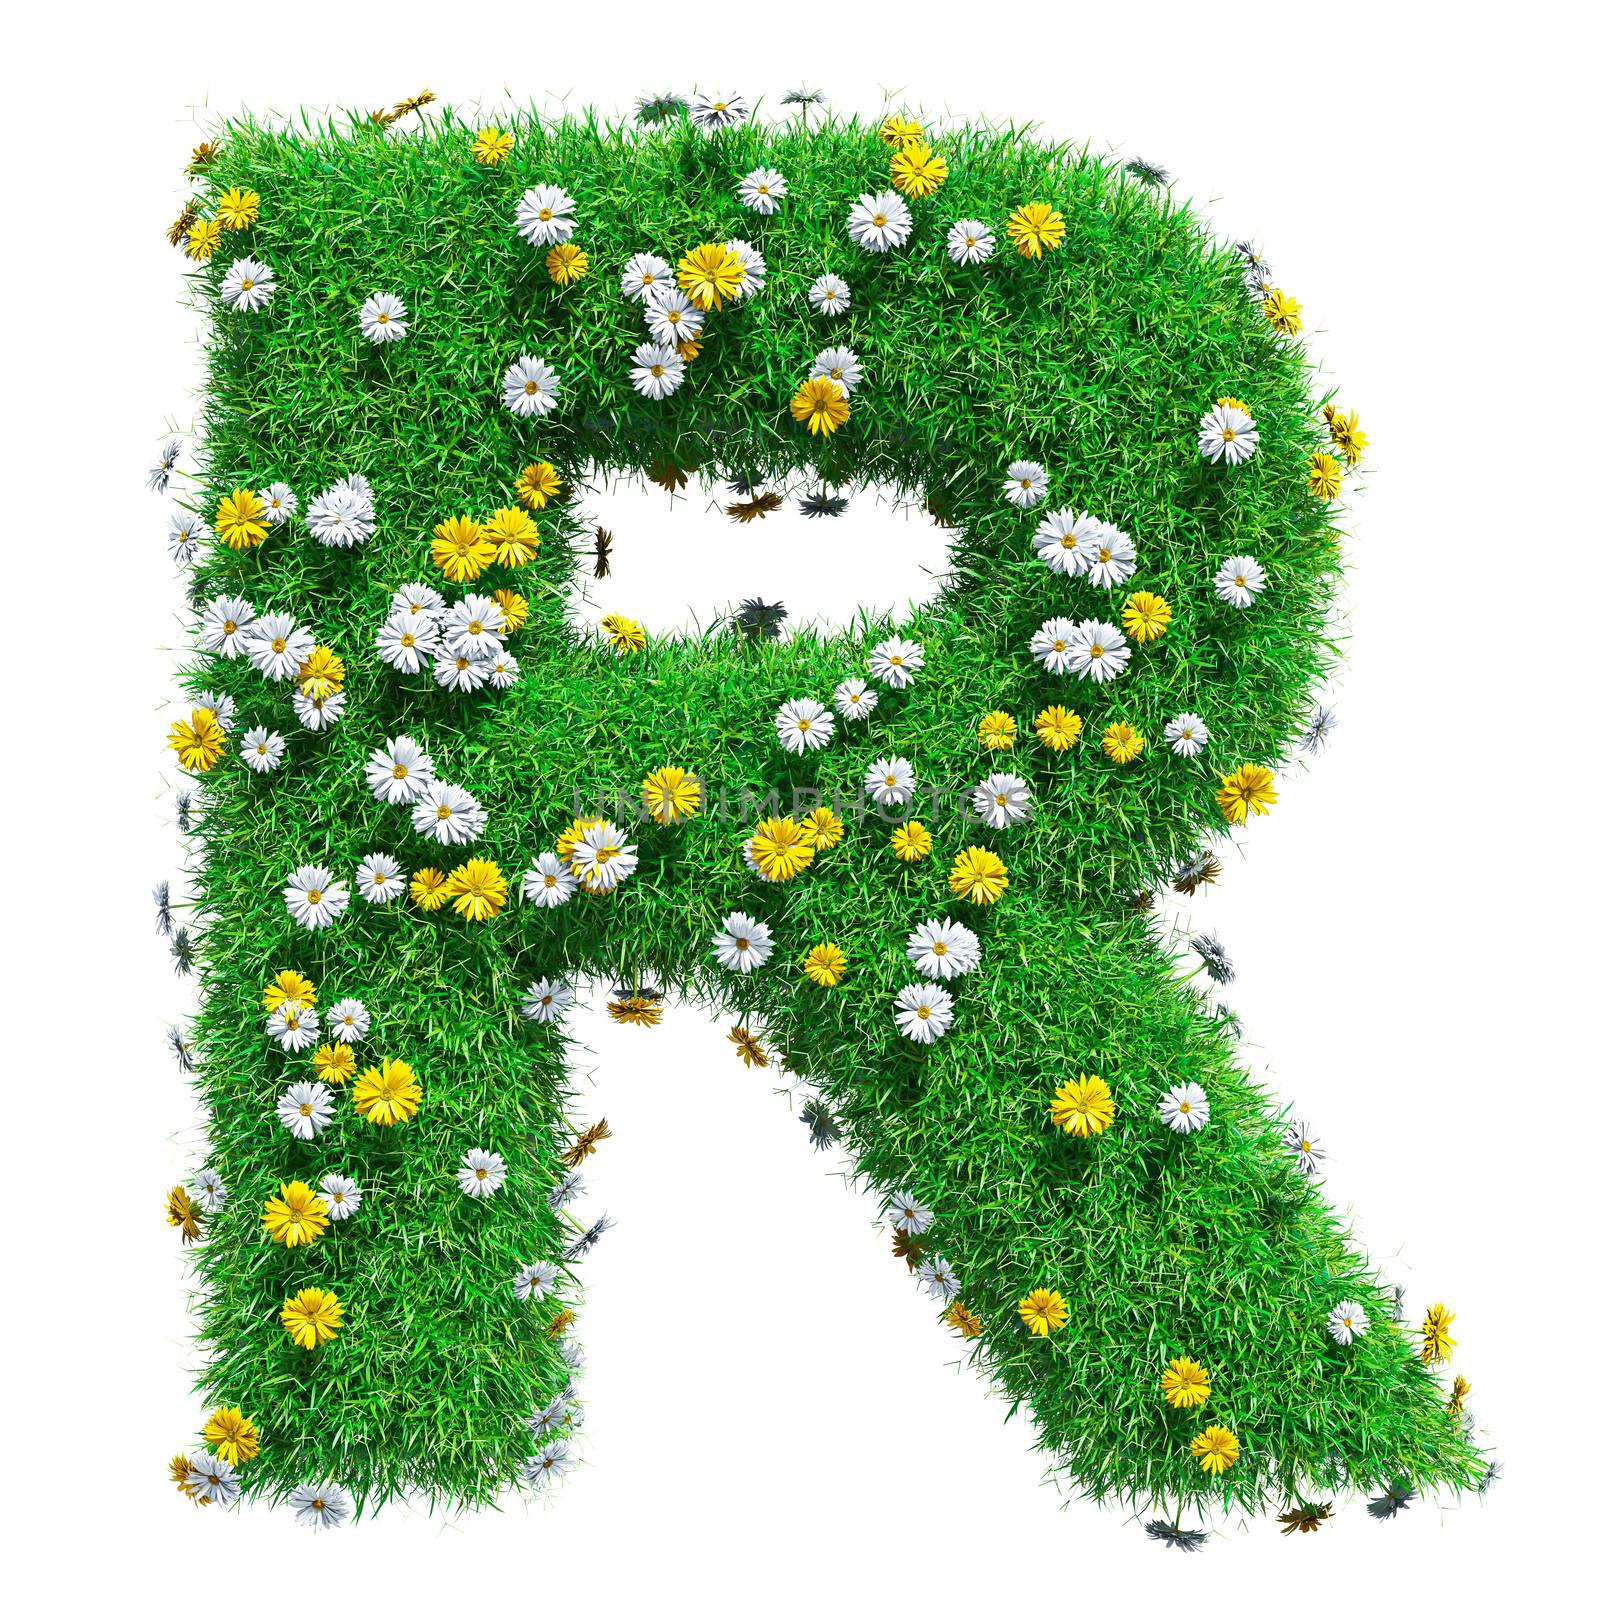 Letter R Of Green Grass And Flowers by cherezoff